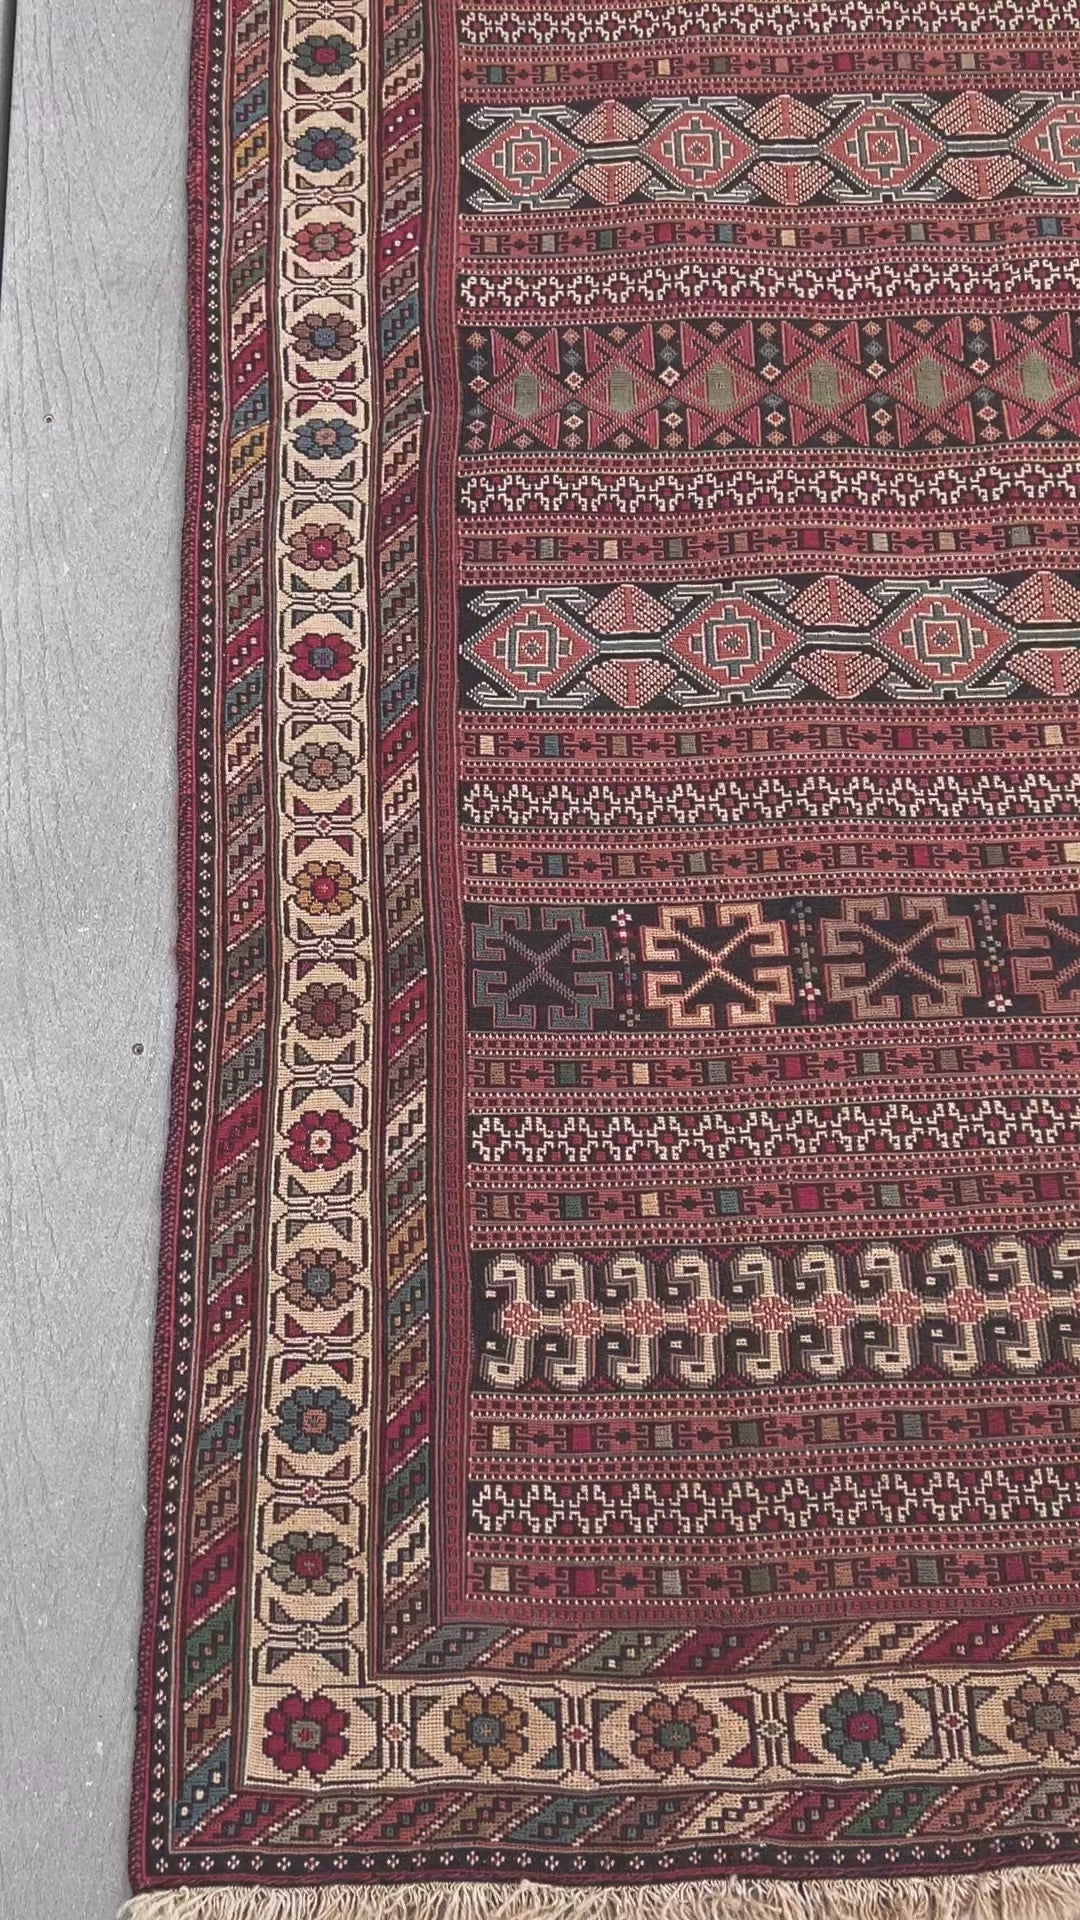 Rahrah Persian Soumak Rug. Small Oriental Rug for Bedroom, Studyi office, living room. Buy handmade rug online free shipping USA and Canada. Orient RUG SHOP San Francisco Bay Area.